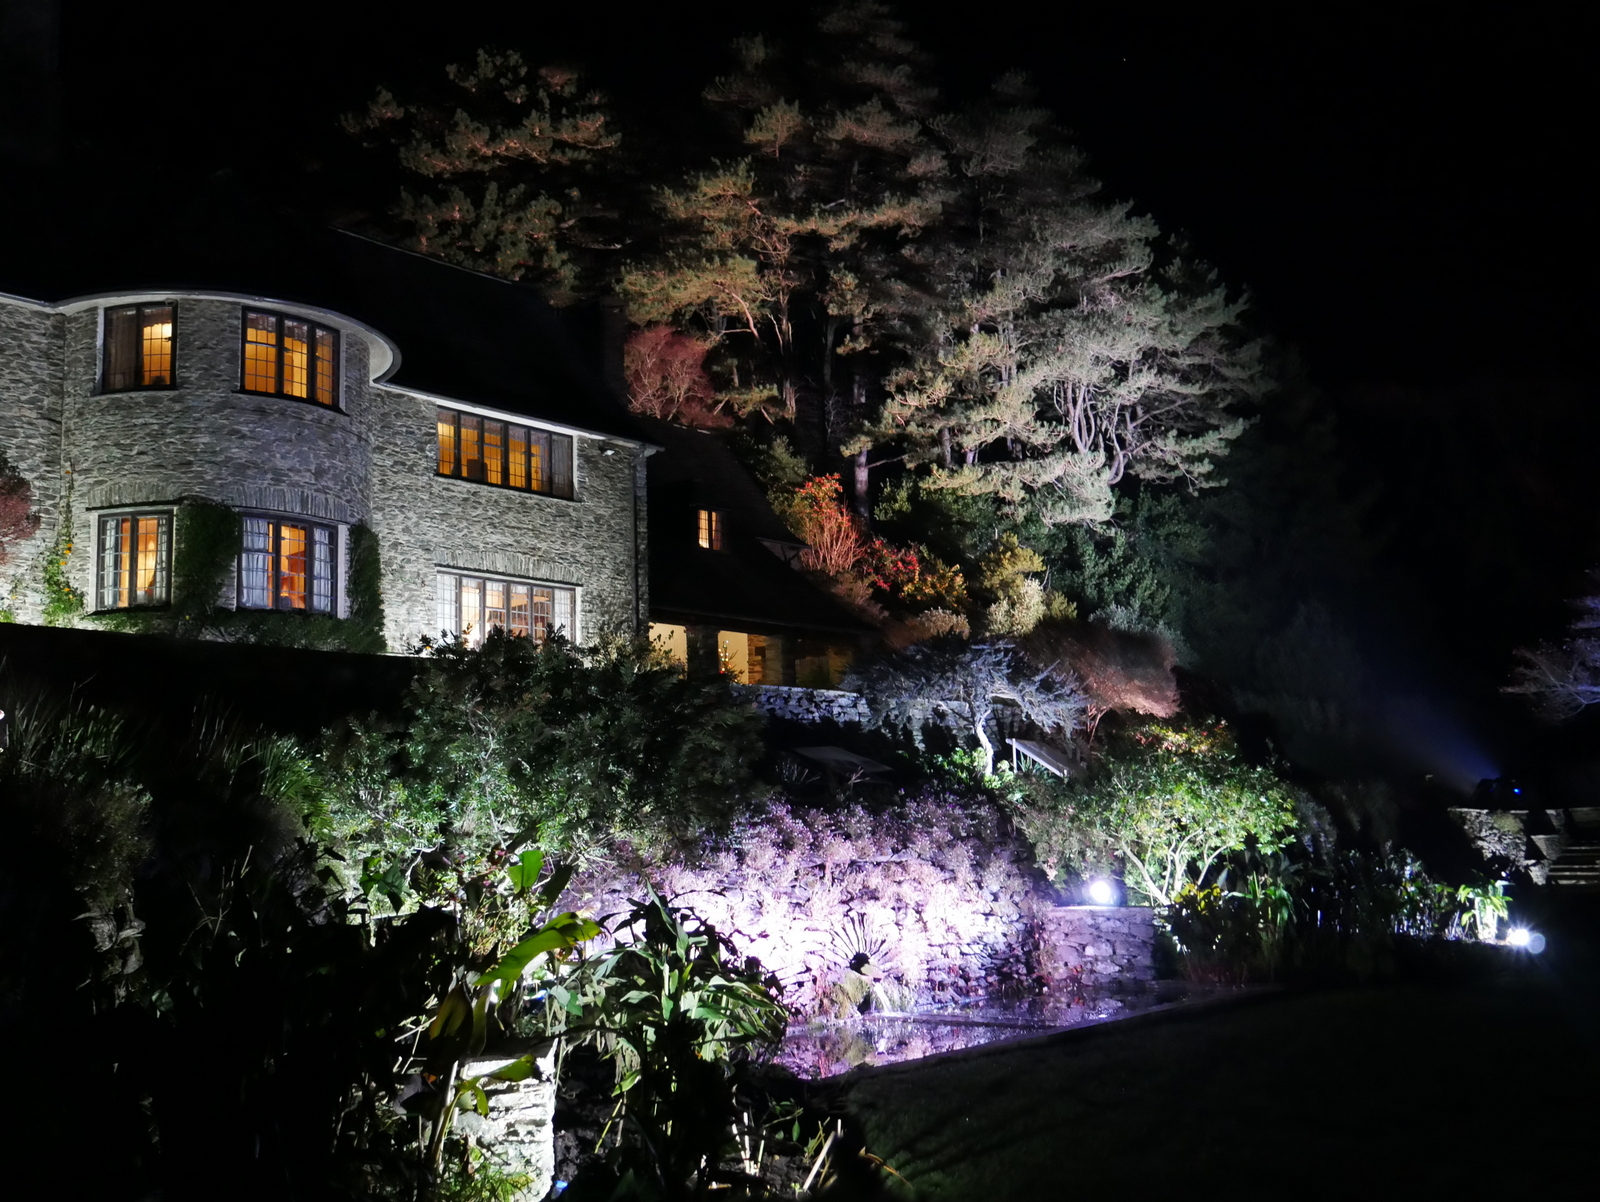 Coleton Aglow - a winter attraction for visitors on short breaks to The Muntham Apartments in Torquay.